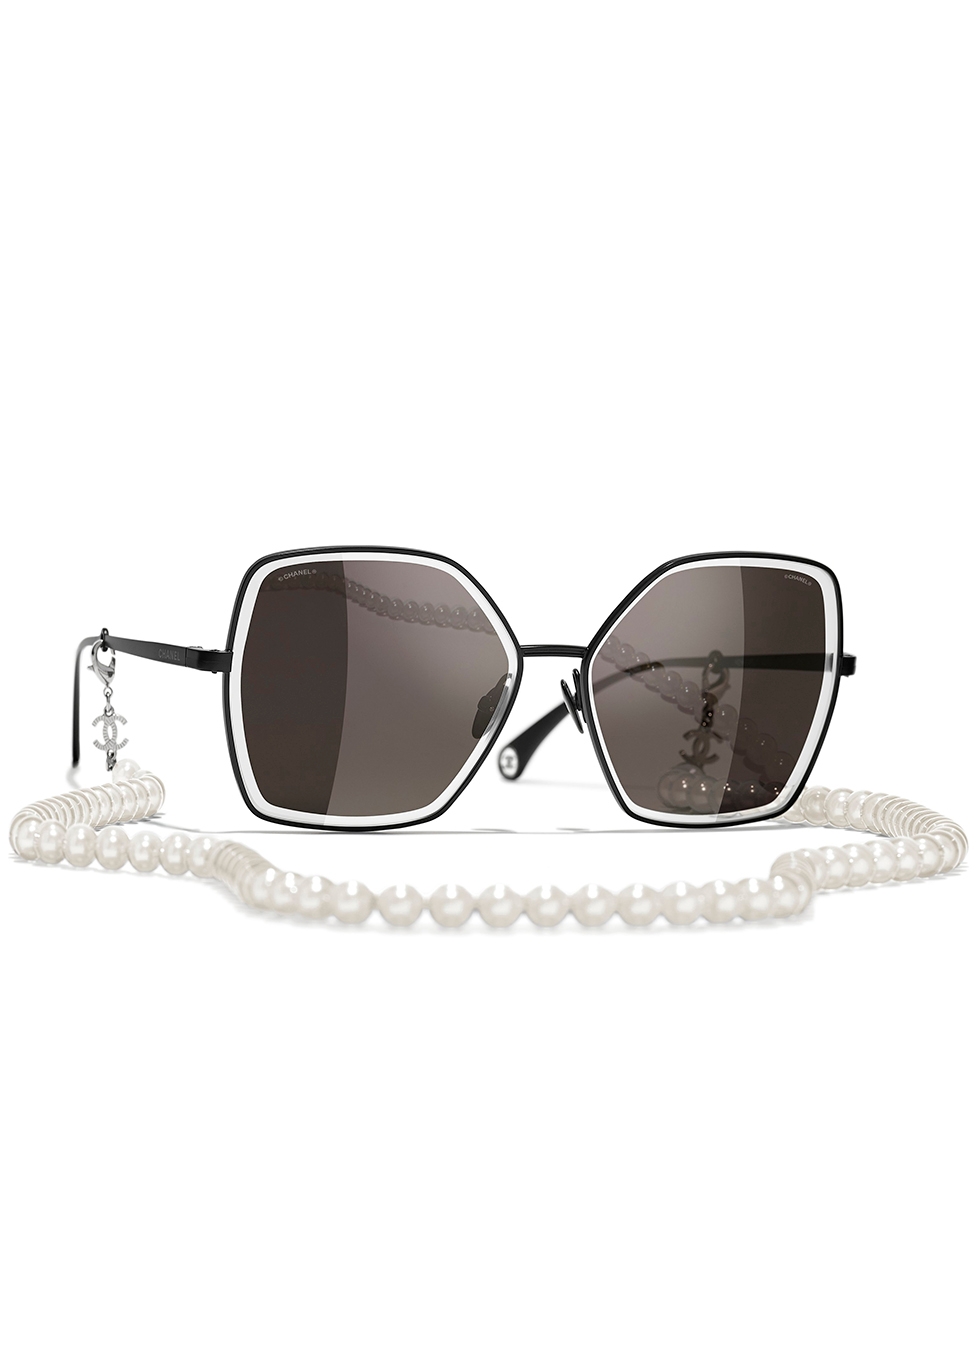 ICONIC FAUX PEARL SUNGLASSES CHANEL  A Collection of a Lifetime Chanel  Online  Jewellery  Sothebys